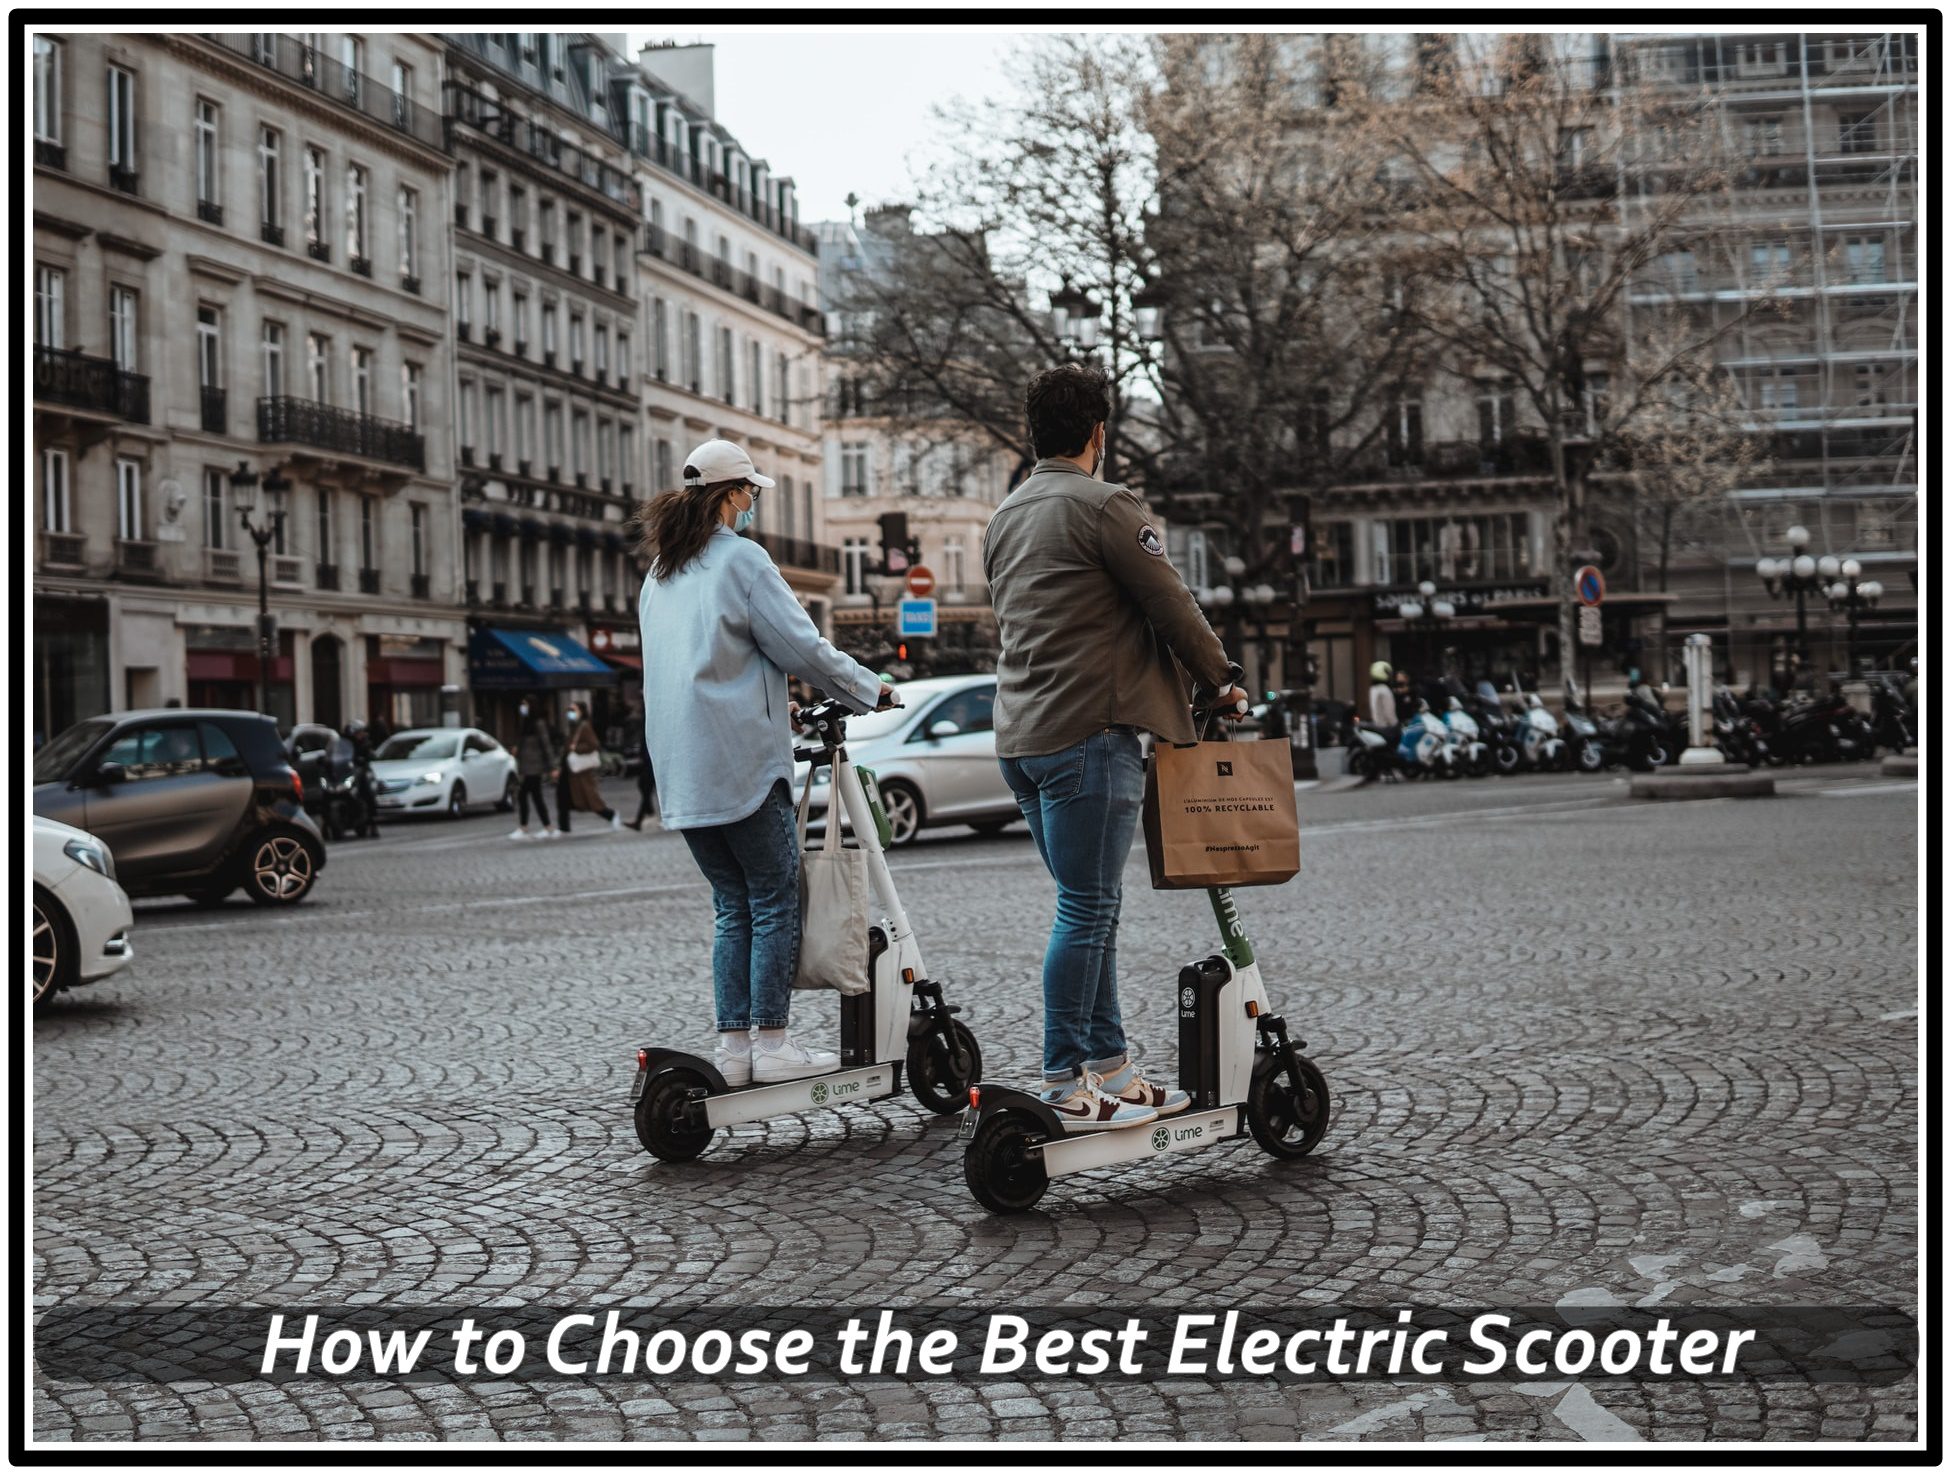 How to Choose the Best Electric Scooter